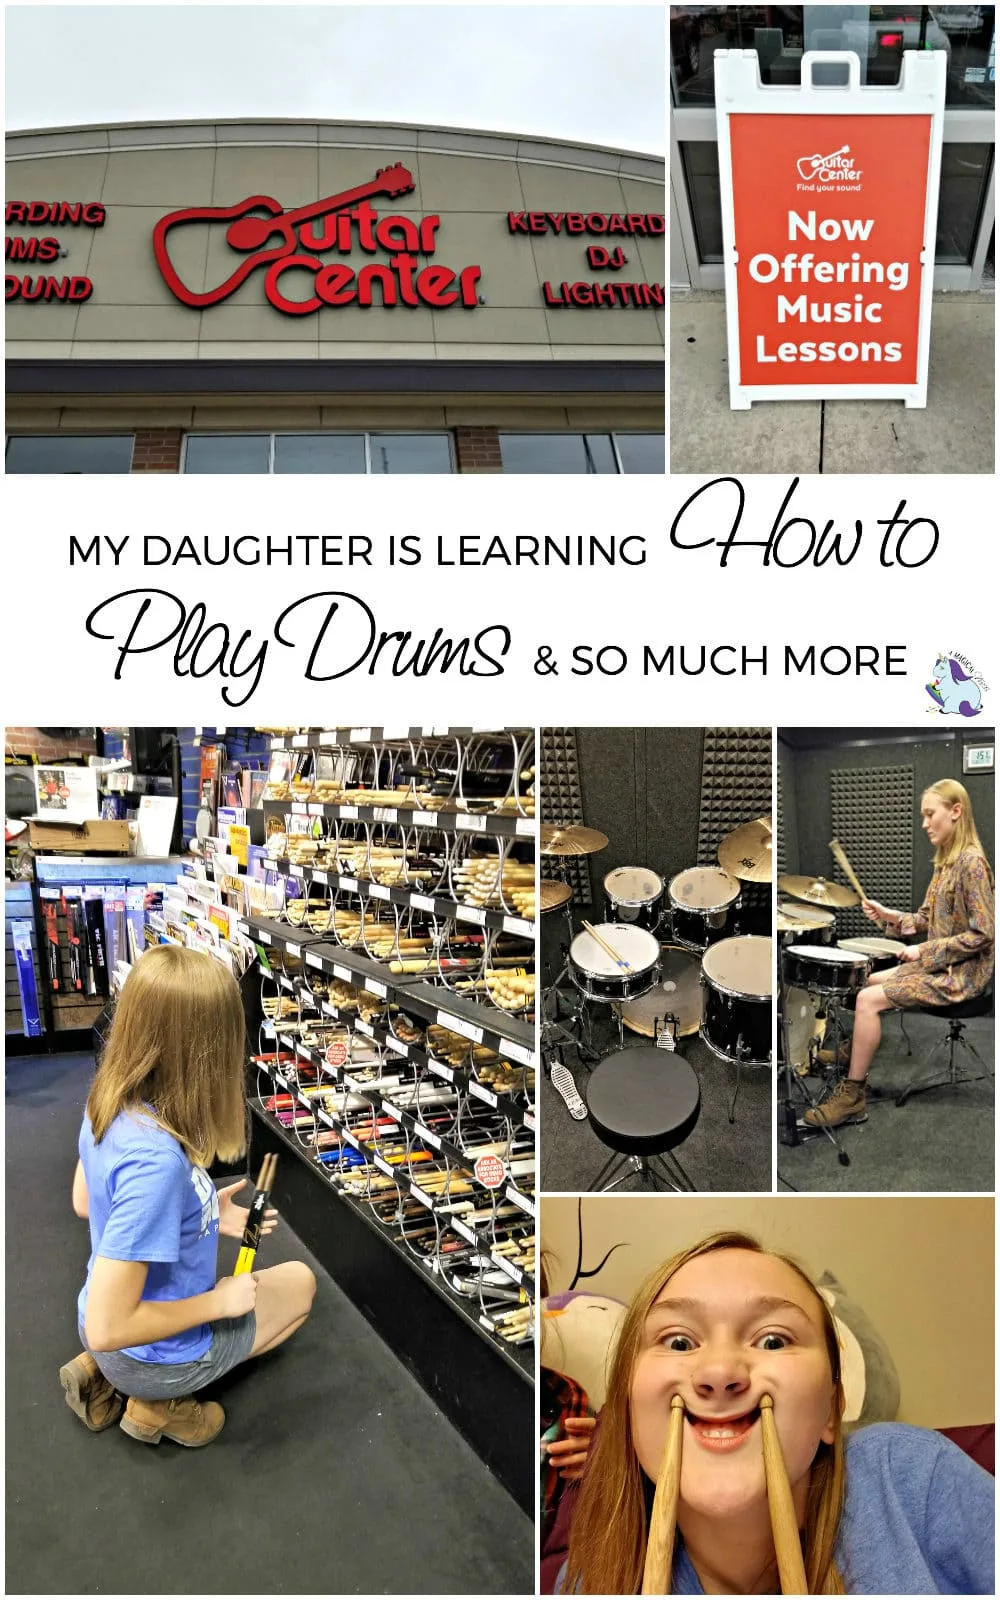 Guitar Center and images of drum lessons in a collage. 